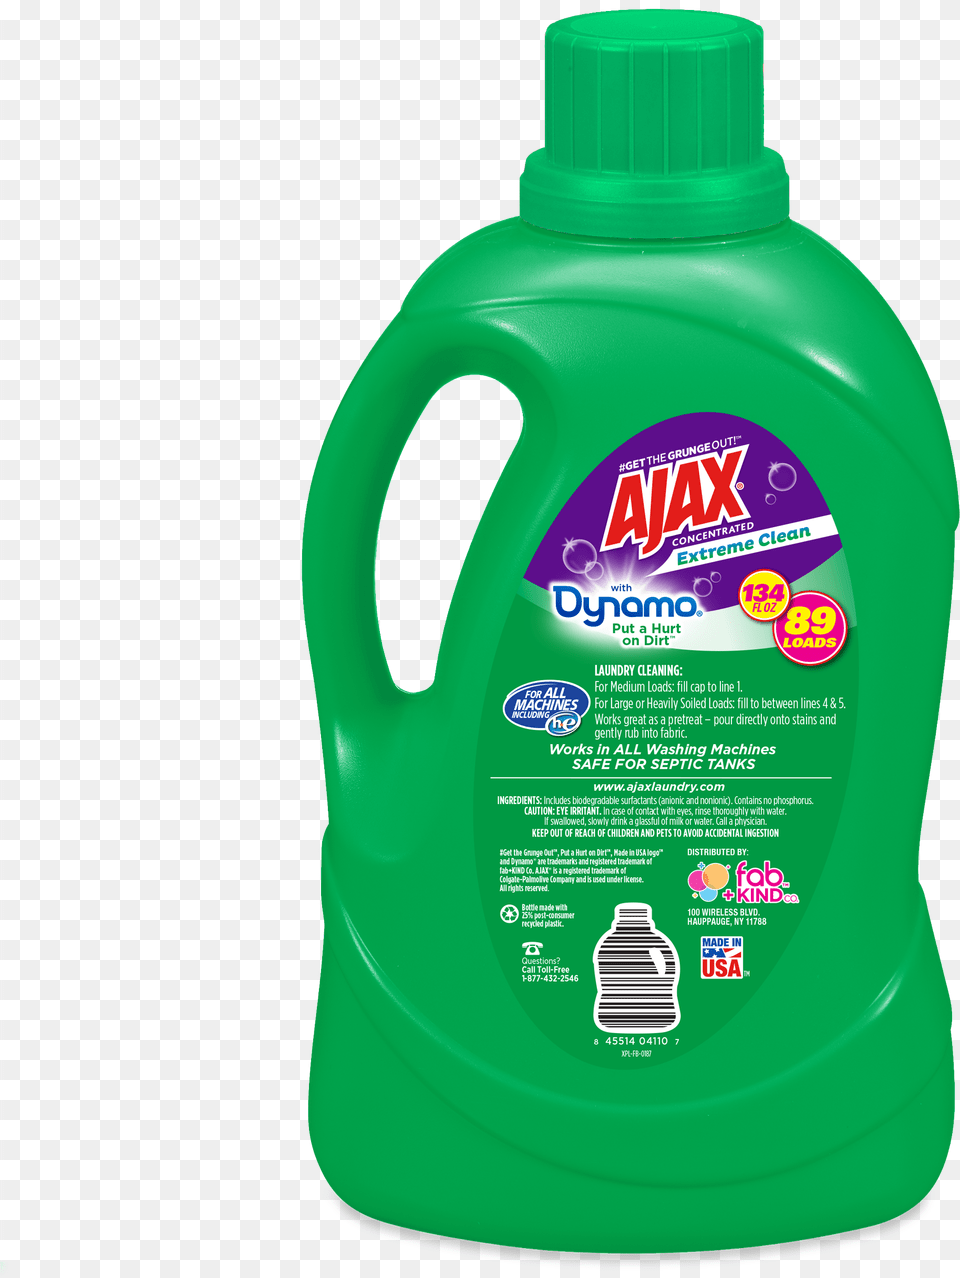 Ajax Laundry Extreme Clean Liquid Laundry Detergent, Bottle, Shaker Free Png Download